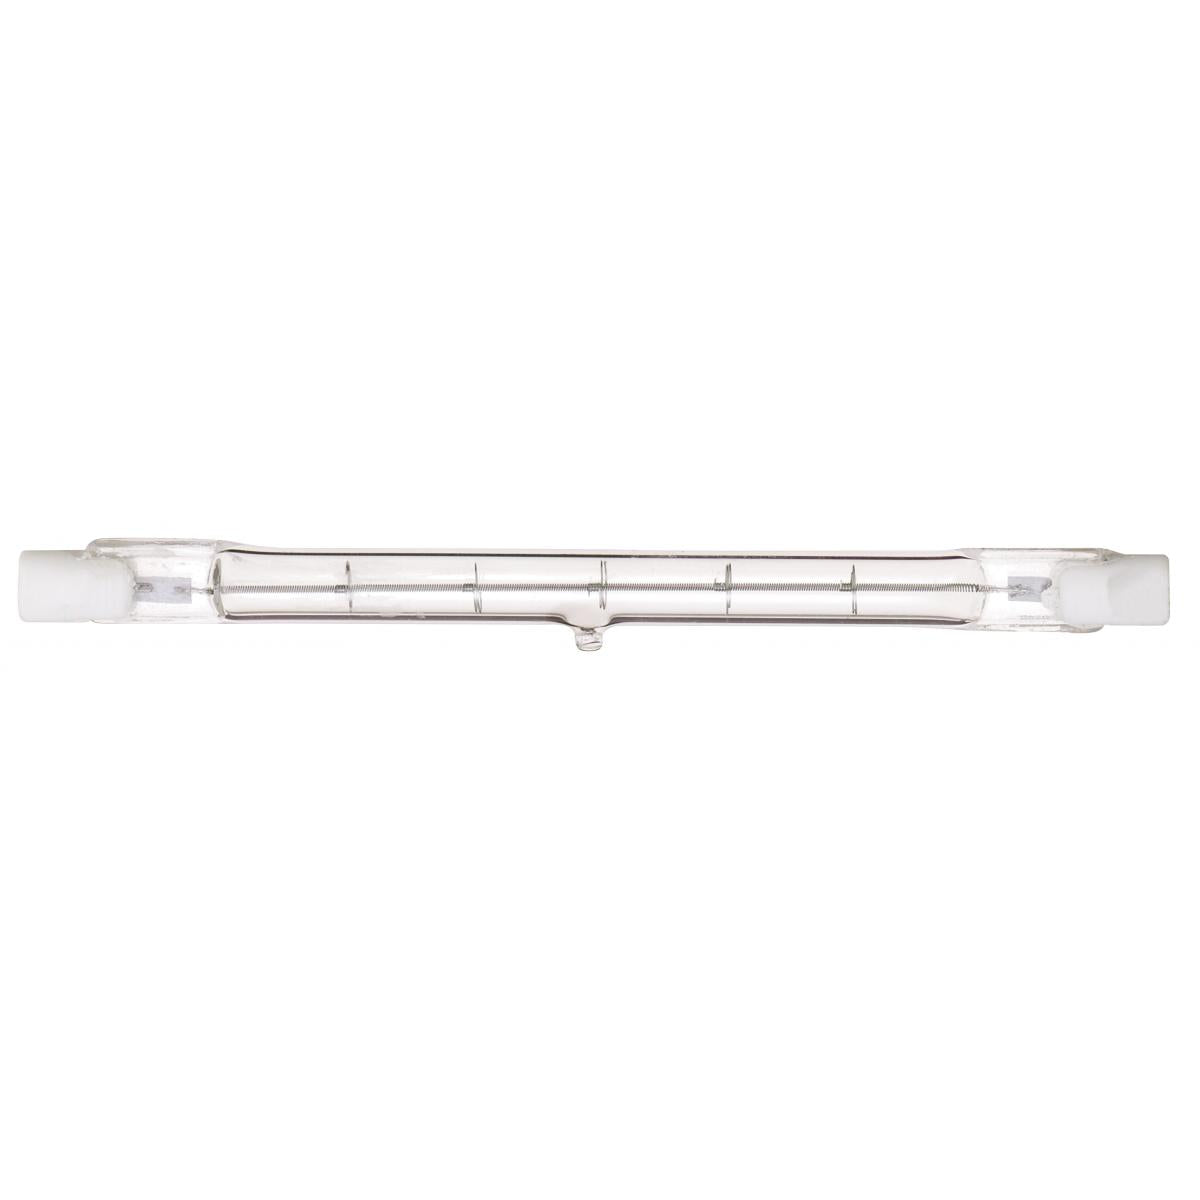 Satco S2890 750 Watt Halogen T3 Clear 1500 Average rated hours 12500 Lumens Double Ended base 220/240 Volt